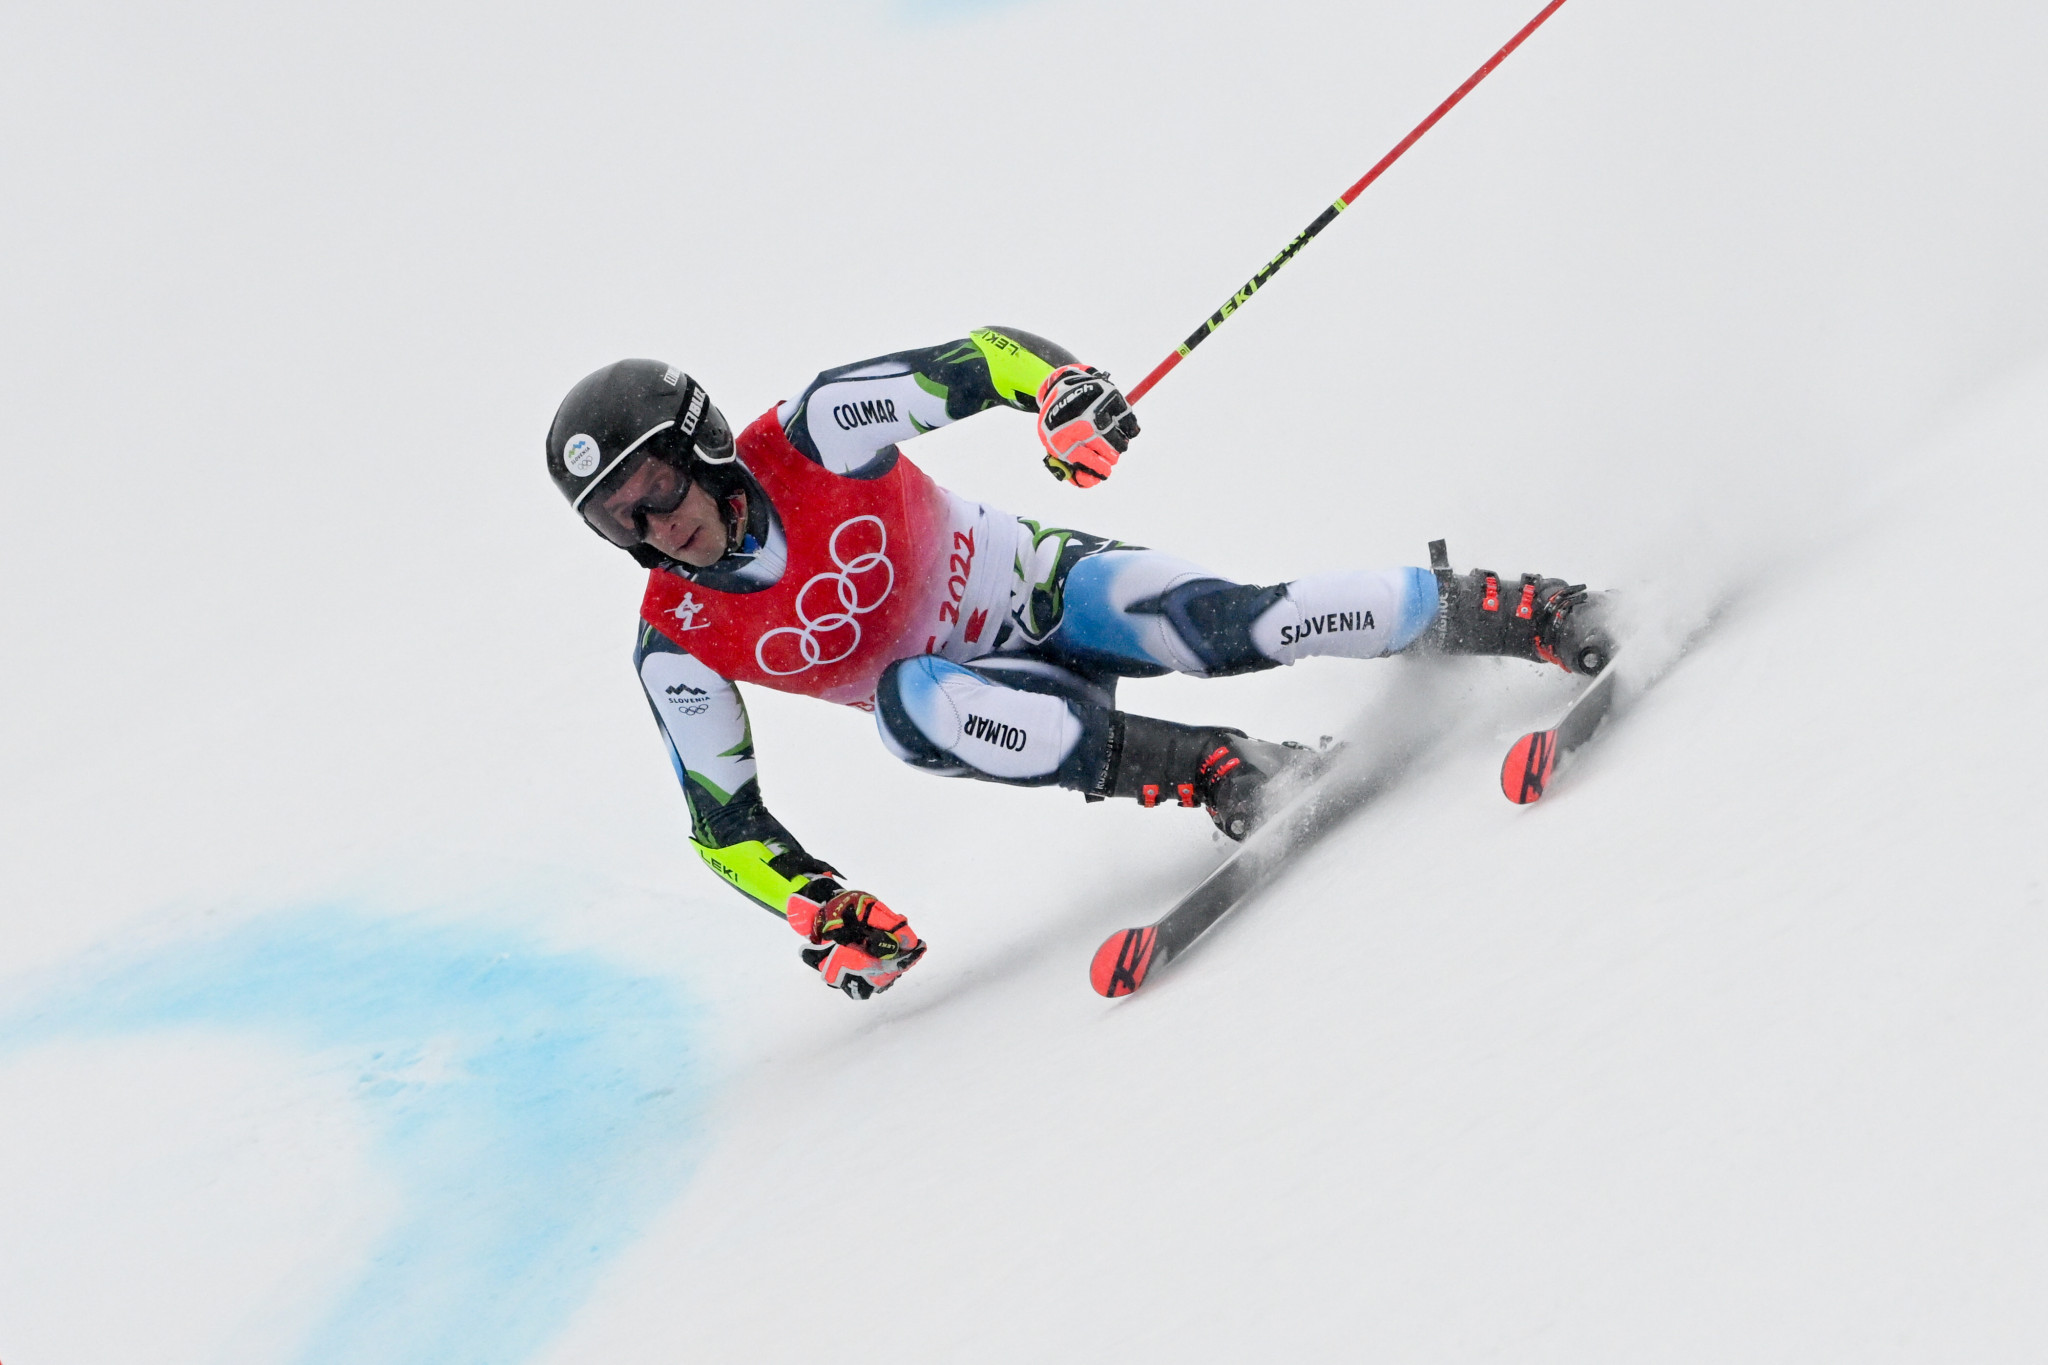 Žan Kranjec produced the fastest time on run two to claim the silver medal ©Getty Images